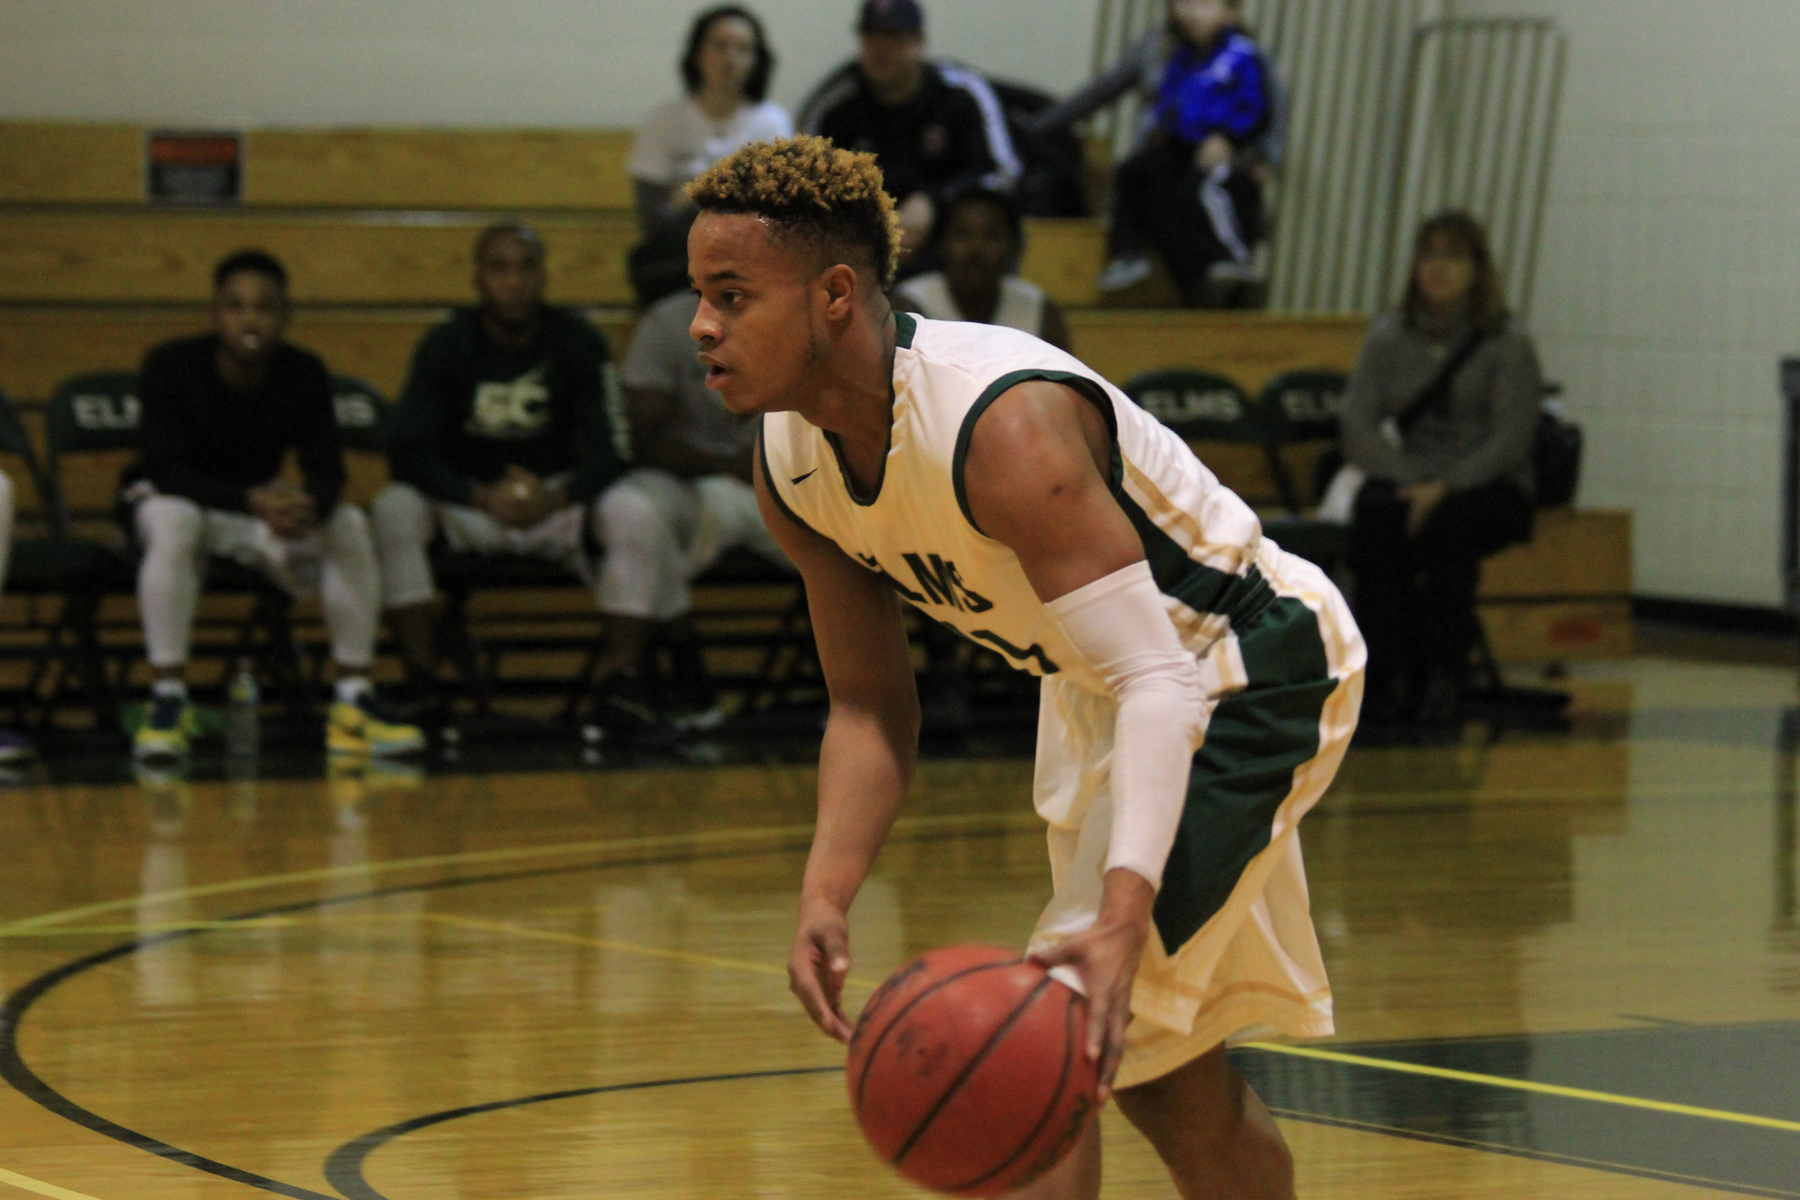 Symon Smith Named NECC Player of the Week